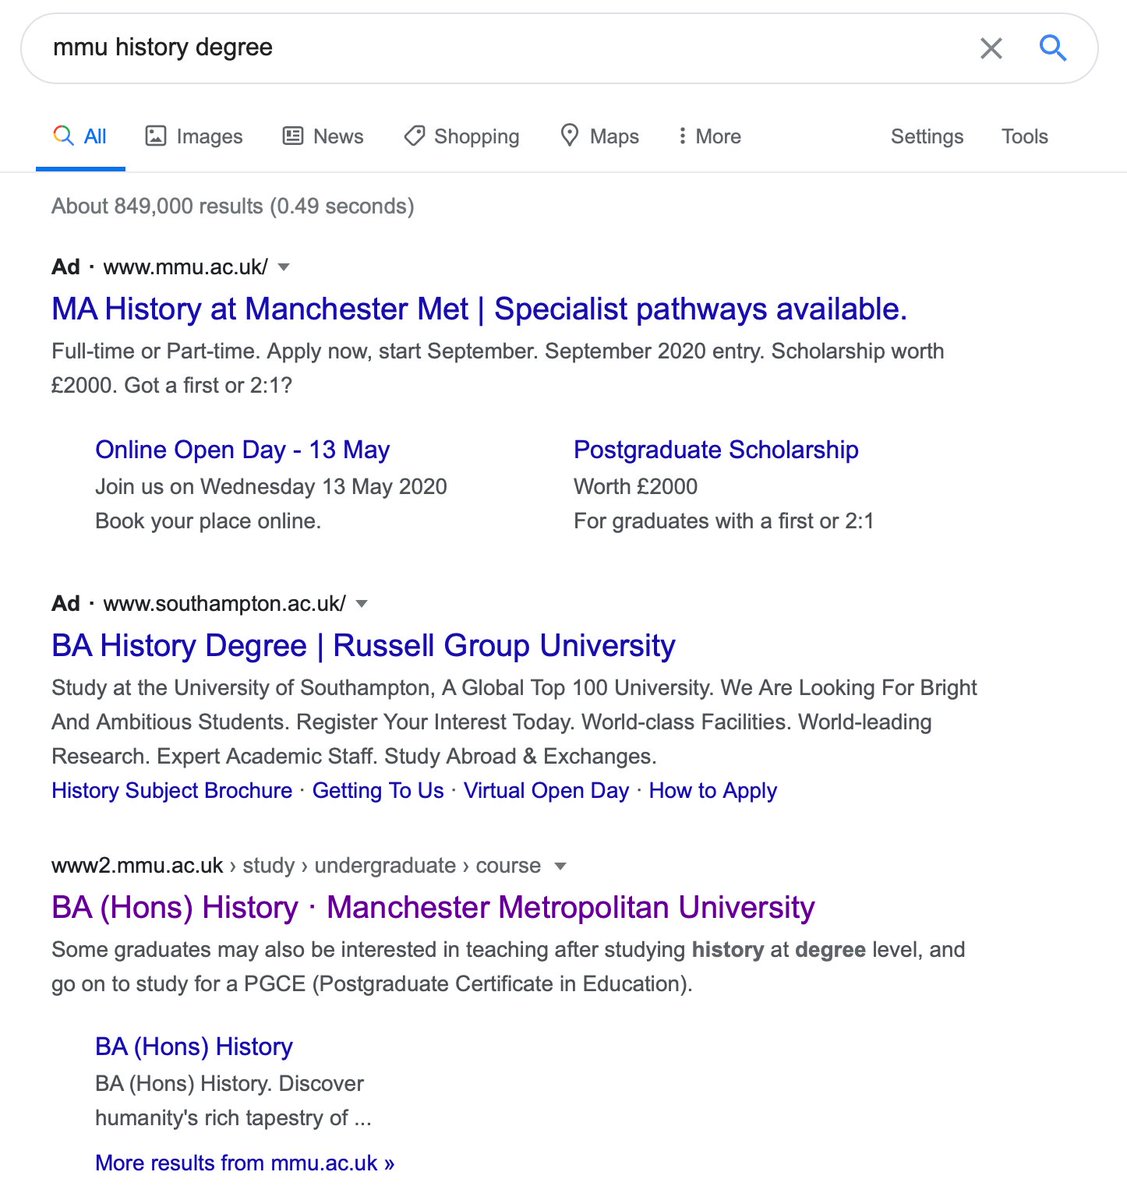 Well, this is interesting. Actual evidence of a Russell Group university trying to poach applicants interested in studying at a post-92. Search for "MMU history degree" on Google and you get a prominent ad for the "Russell Group University" in Southampton.